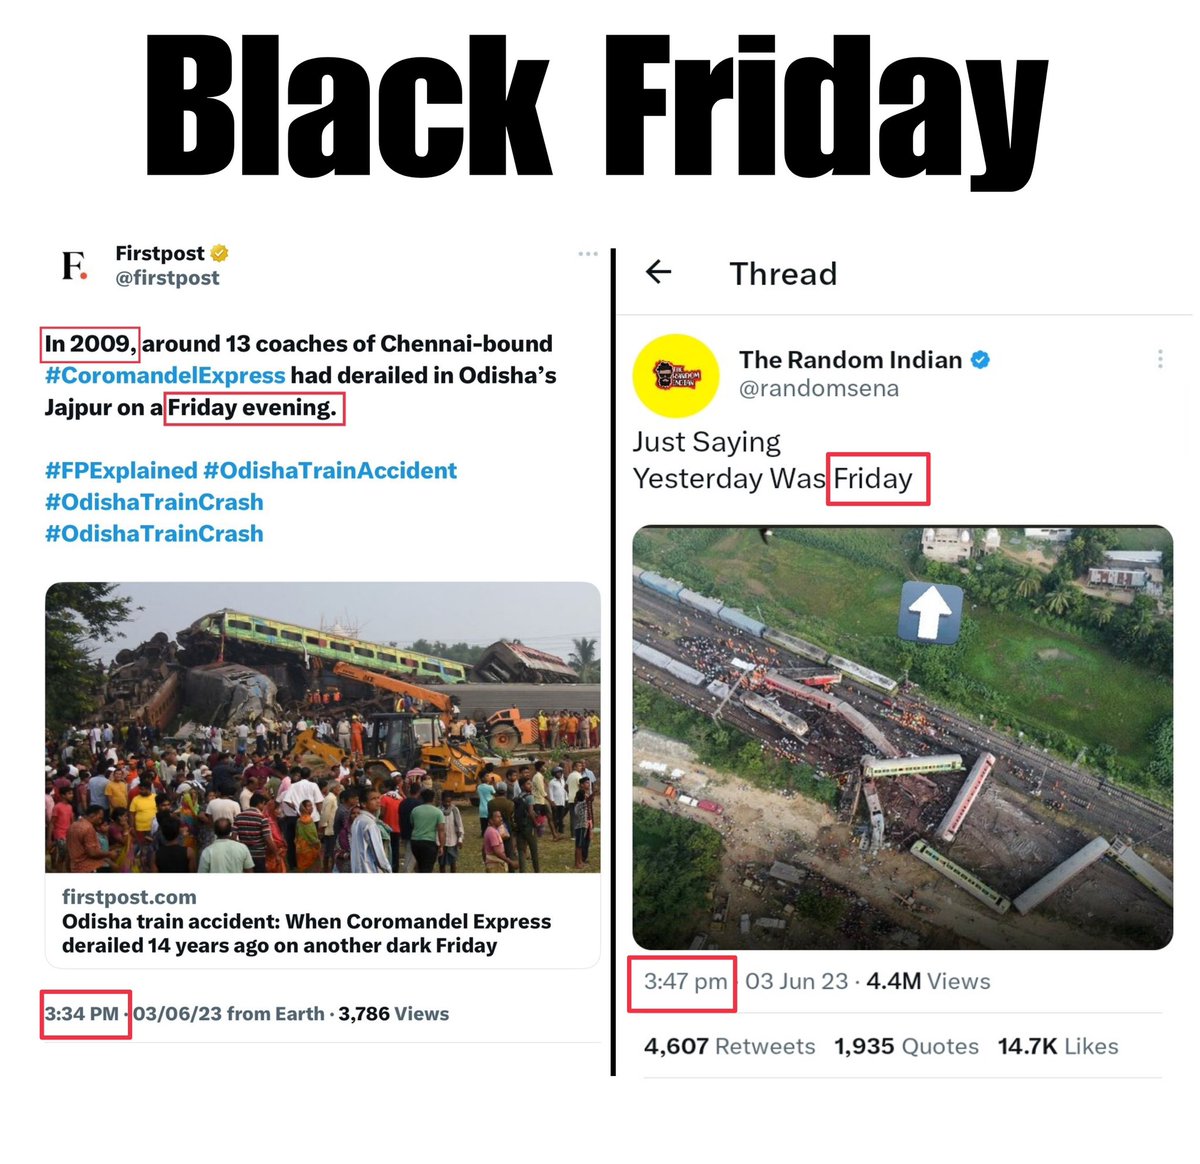 In 2009, same train, Coromandel Express got derailed in Odisha, on a Friday. Same train, same state, same day. That’s what I meant by the ‘Friday’ reference but my tweet was misinterpreted by many. So, I’m deleting my tweet to put an end to all of this. But it was actually a…